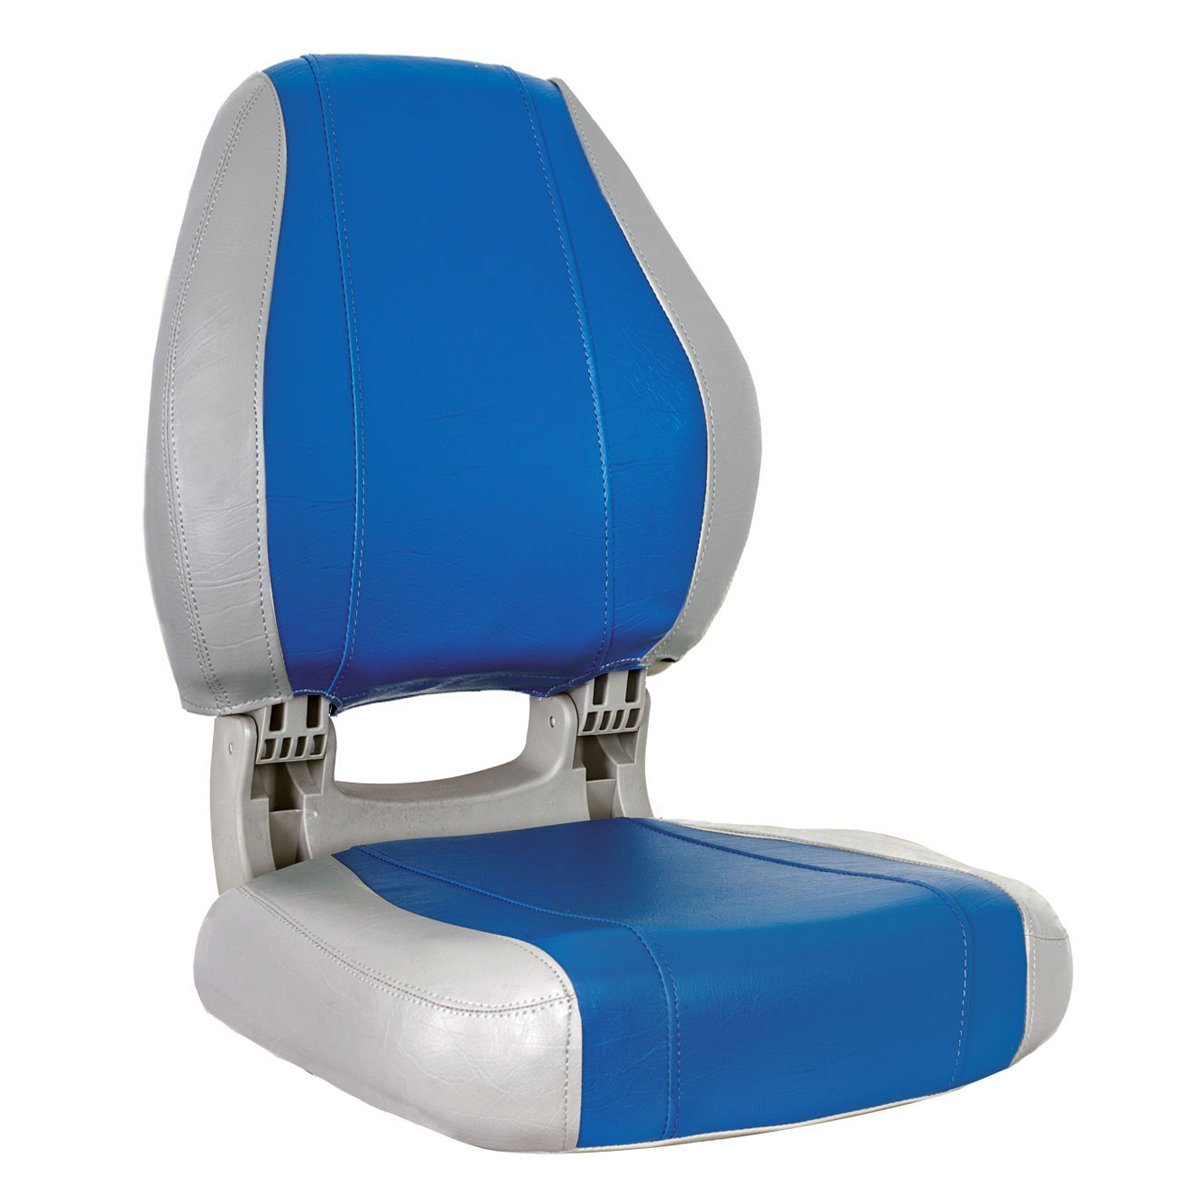 NEW STYLE SIROCCO FOLDING BOAT SEAT - $99.00 AT DINGHY WORLD